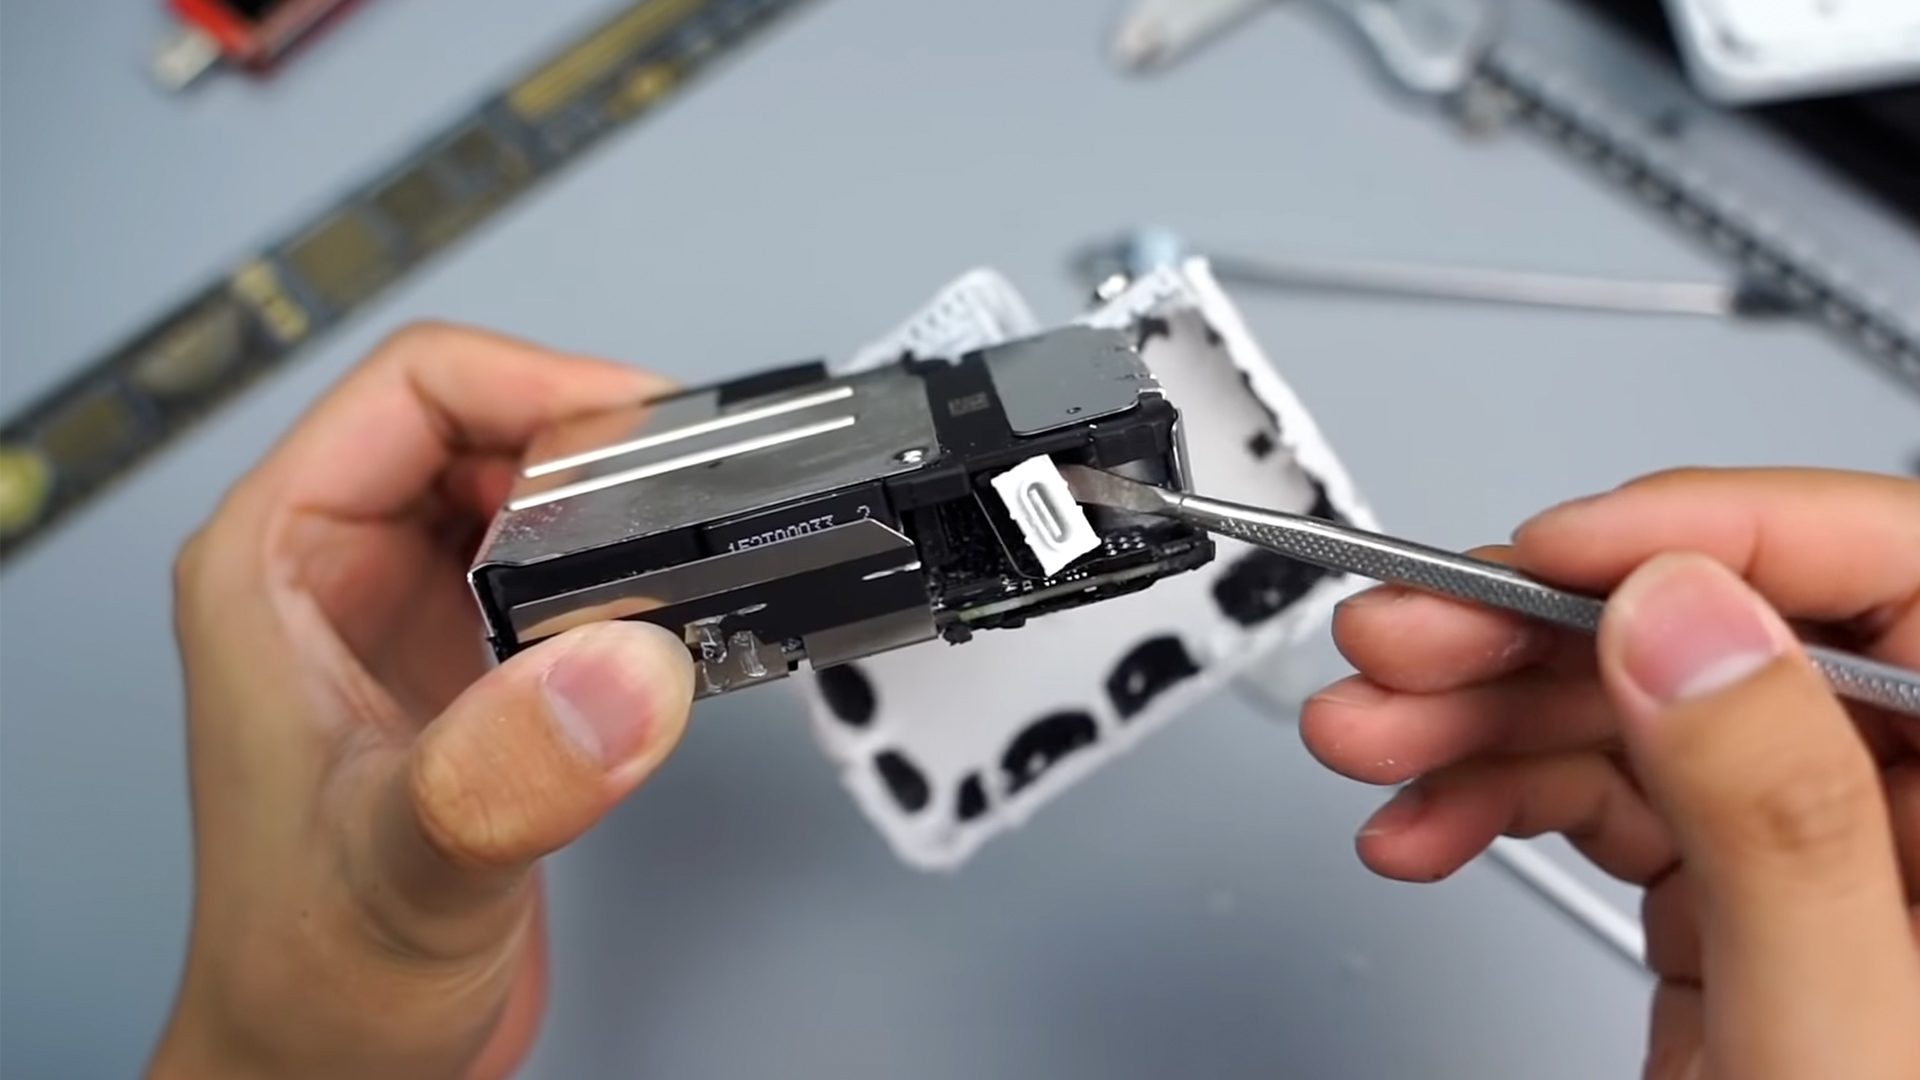 Macbook charger teardown: The surprising complexity inside Apple's